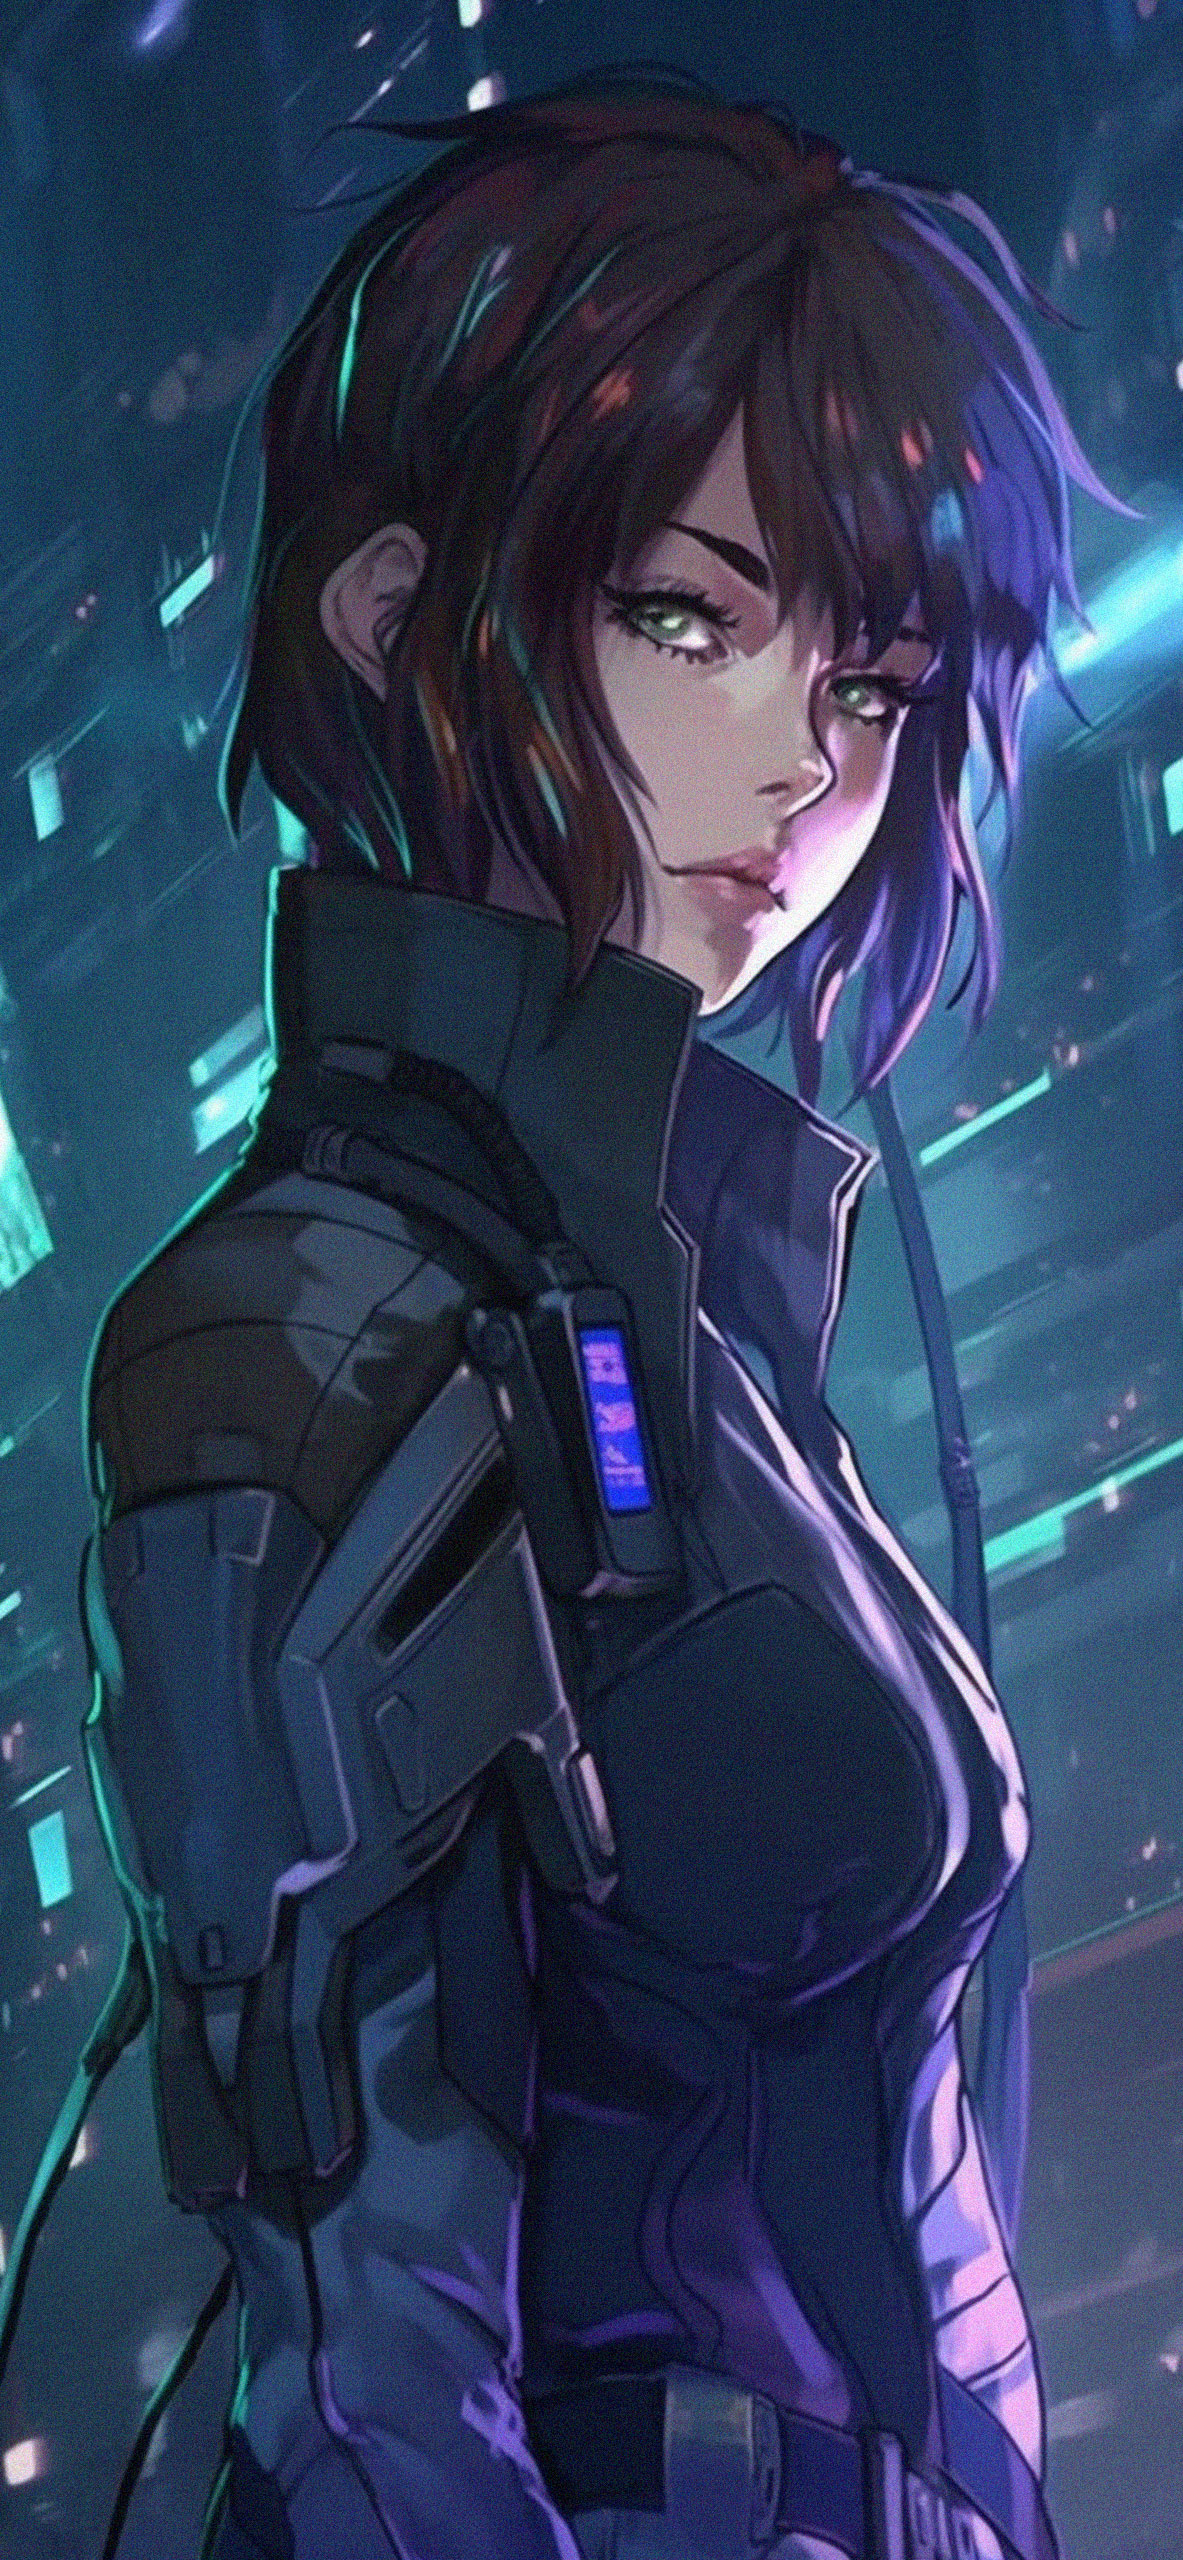 Top 999+ Ghost In The Shell Wallpaper Full HD, 4K✓Free to Use